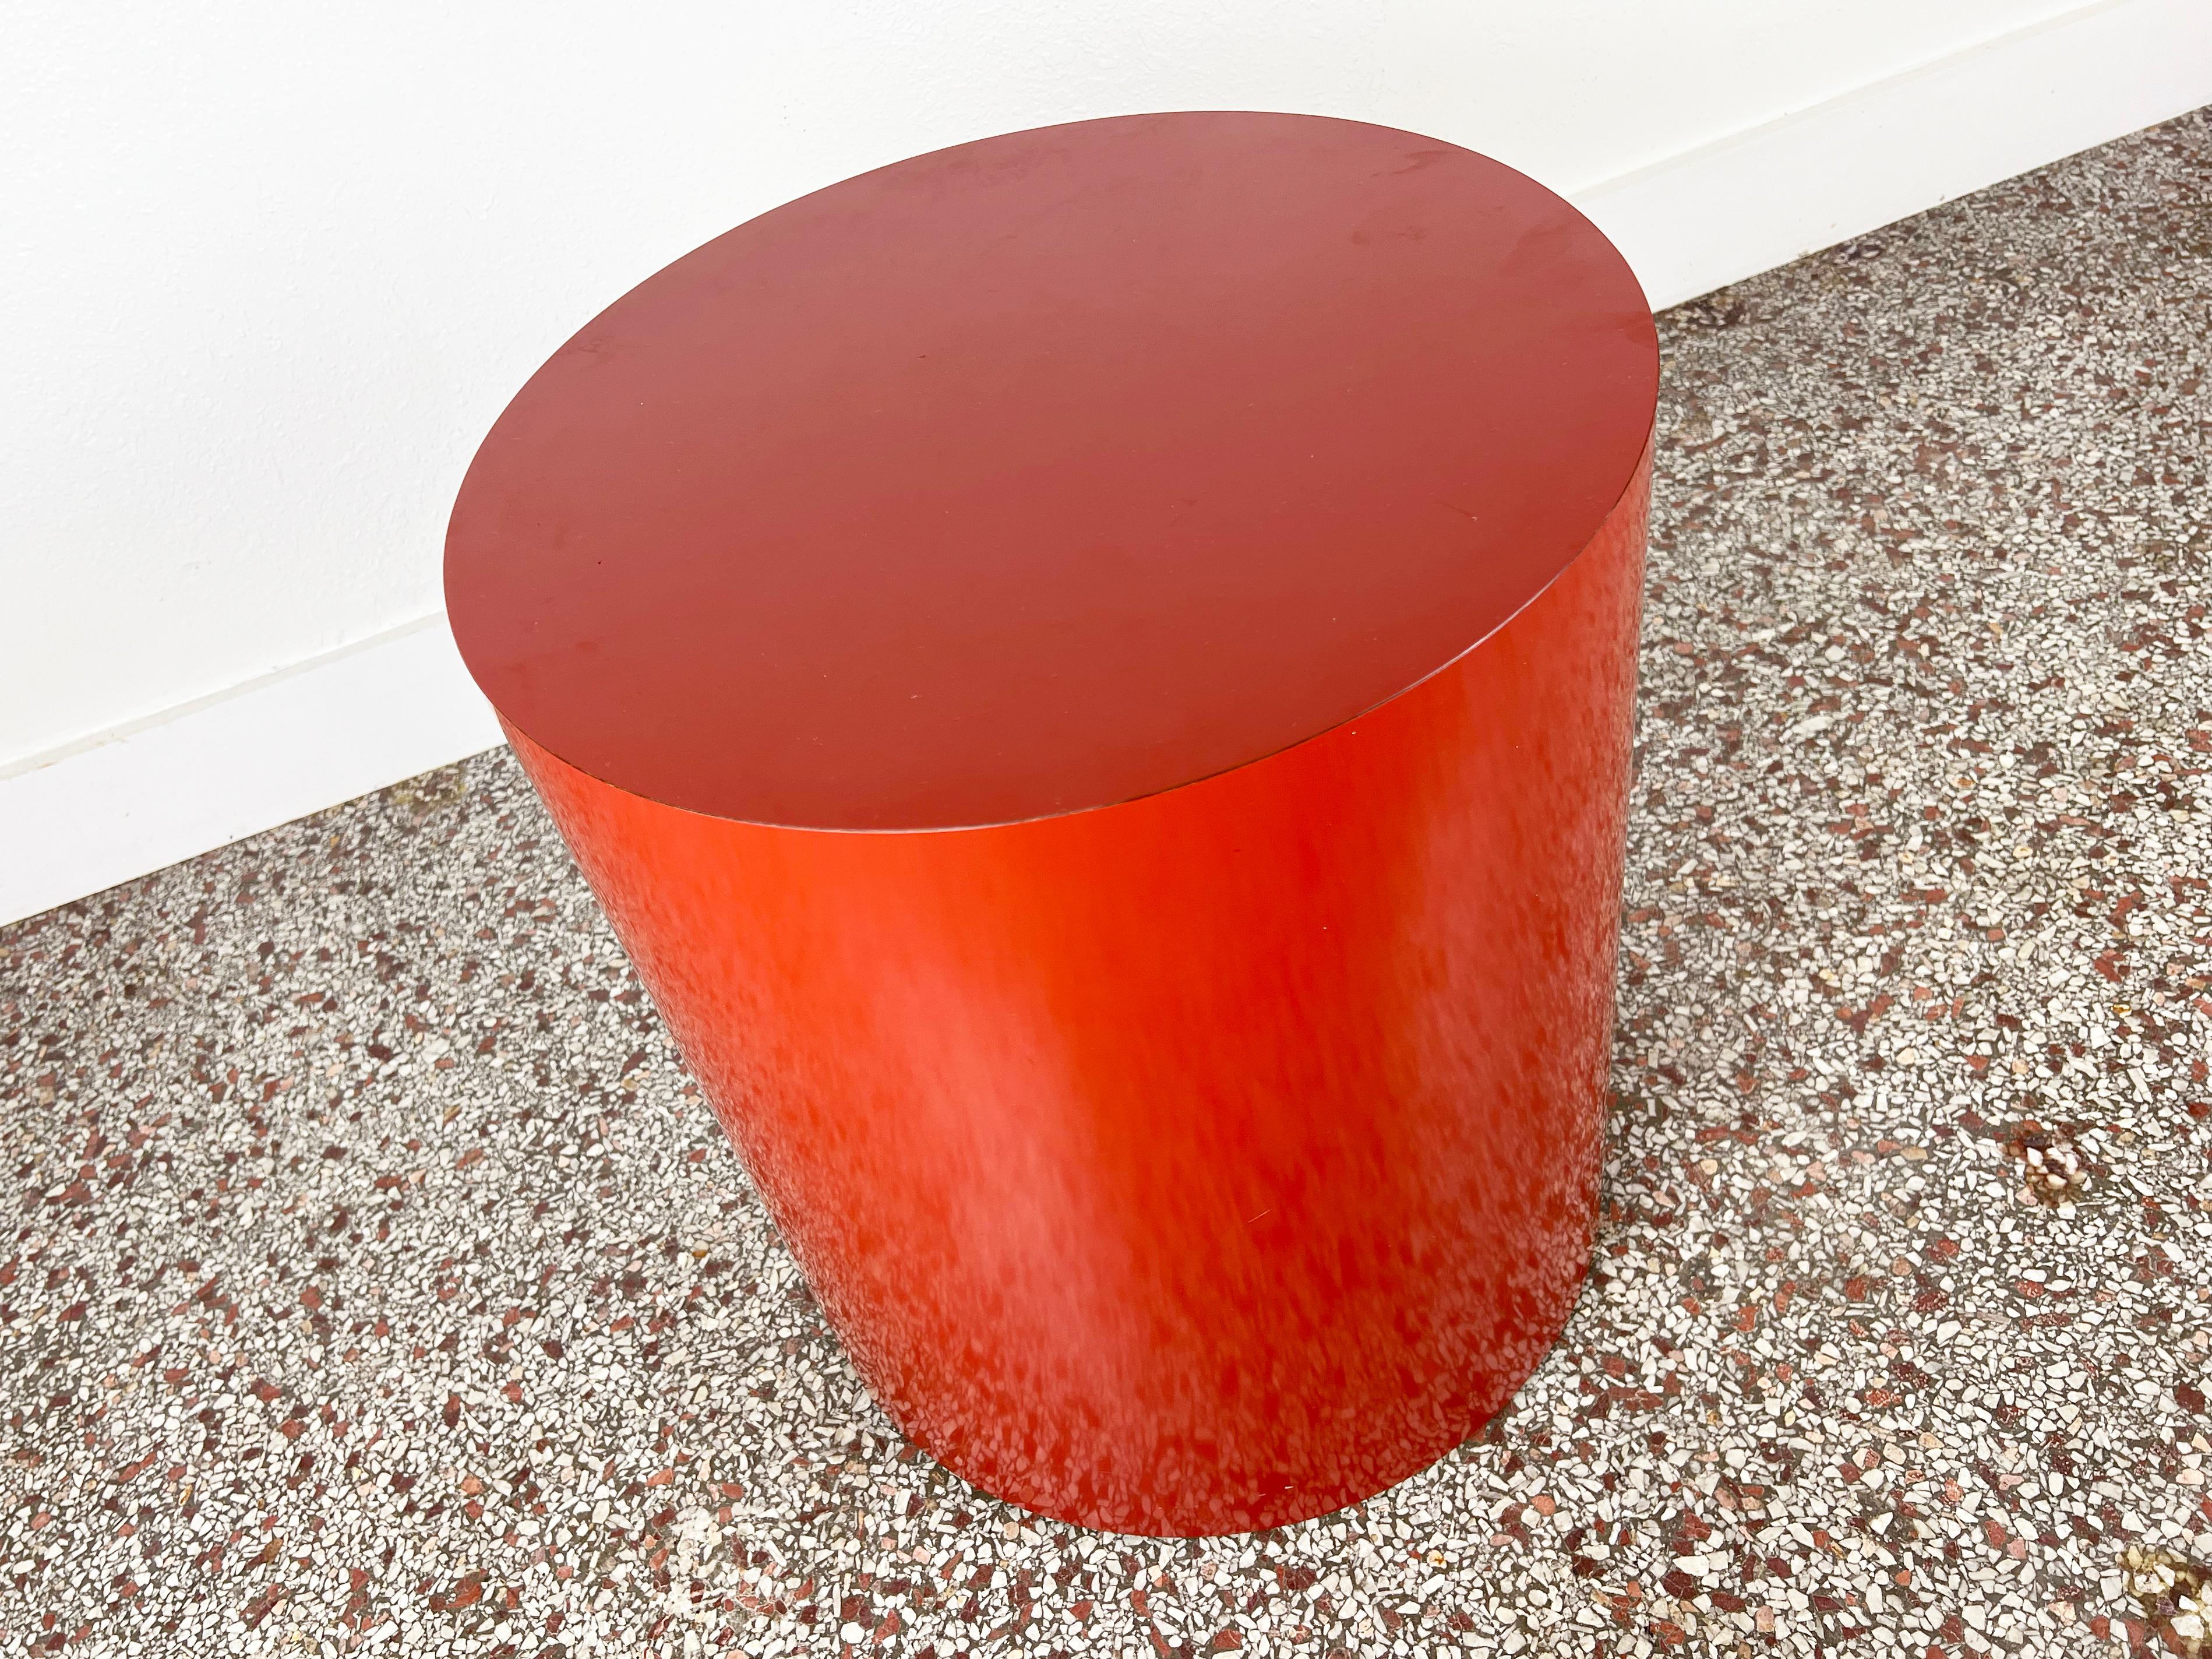 Vintage cylindrical red-orange laminate drum table.

Year: 1970s

Origin: USA

Style: Mid-Century Modern

Dimensions: 18.25